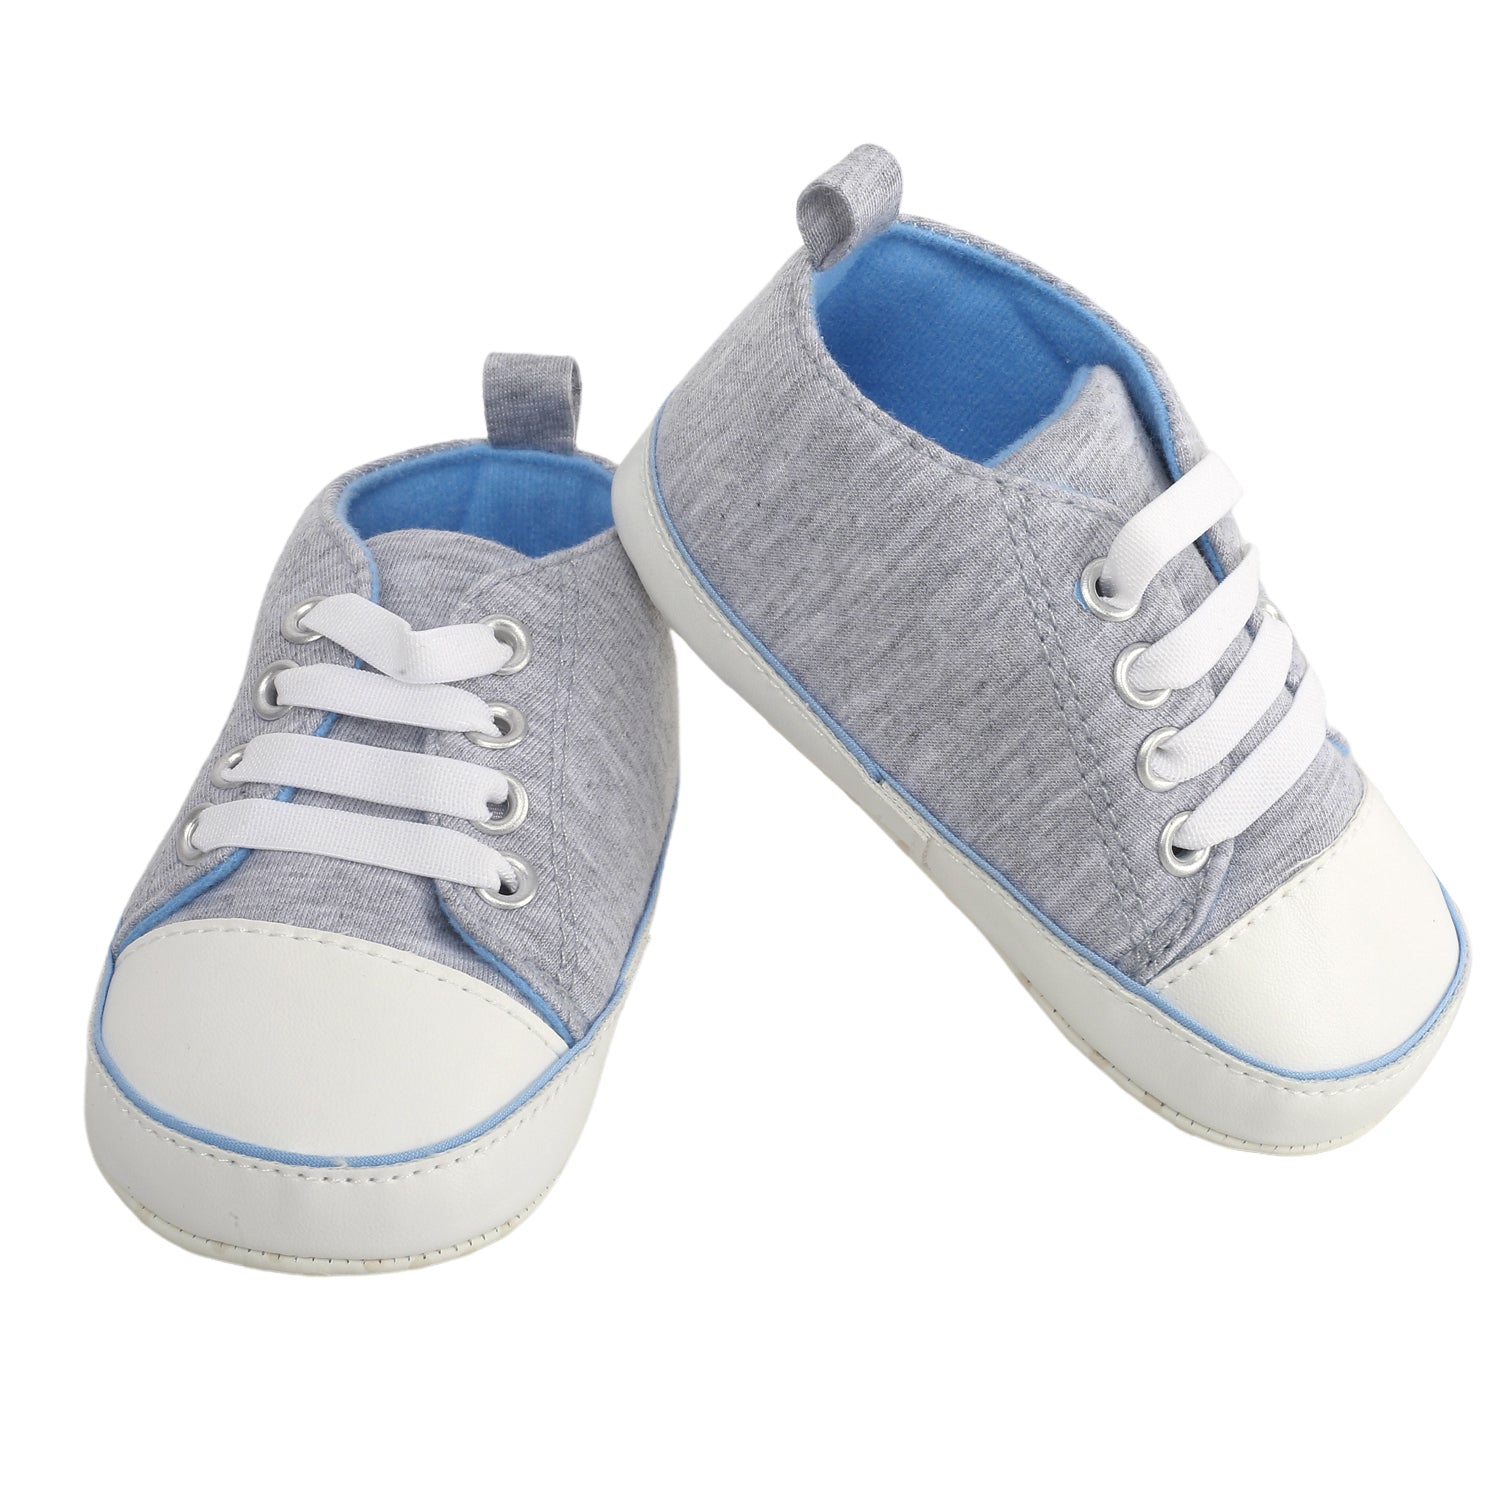 Baby Moo Grey Lace Up Sneakers - Baby Moo